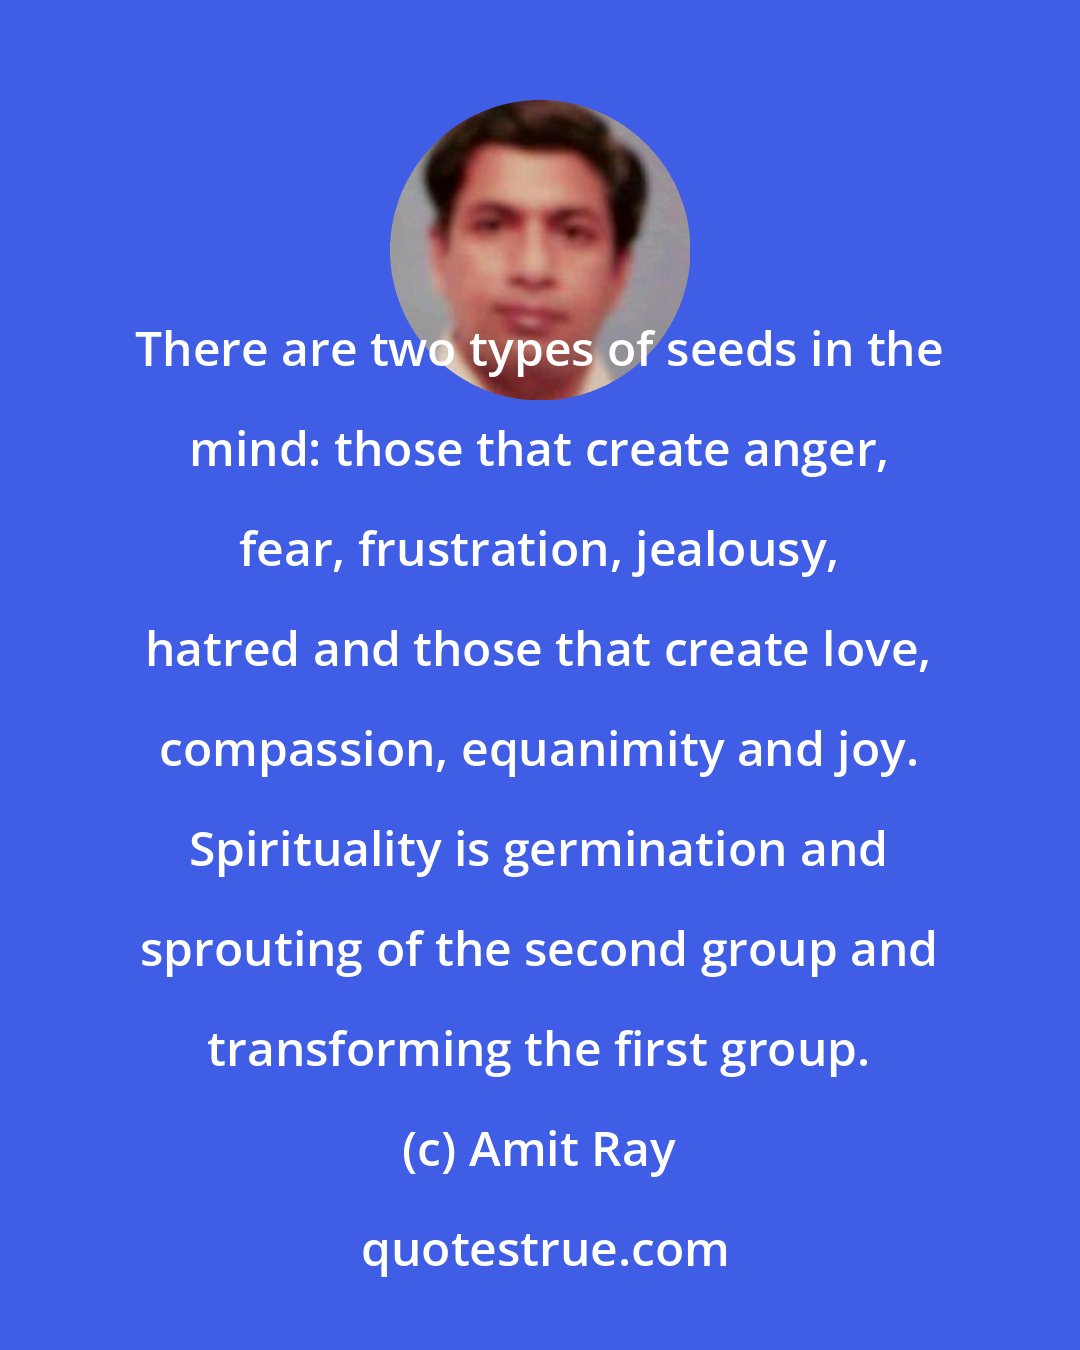 Amit Ray: There are two types of seeds in the mind: those that create anger, fear, frustration, jealousy, hatred and those that create love, compassion, equanimity and joy. Spirituality is germination and sprouting of the second group and transforming the first group.